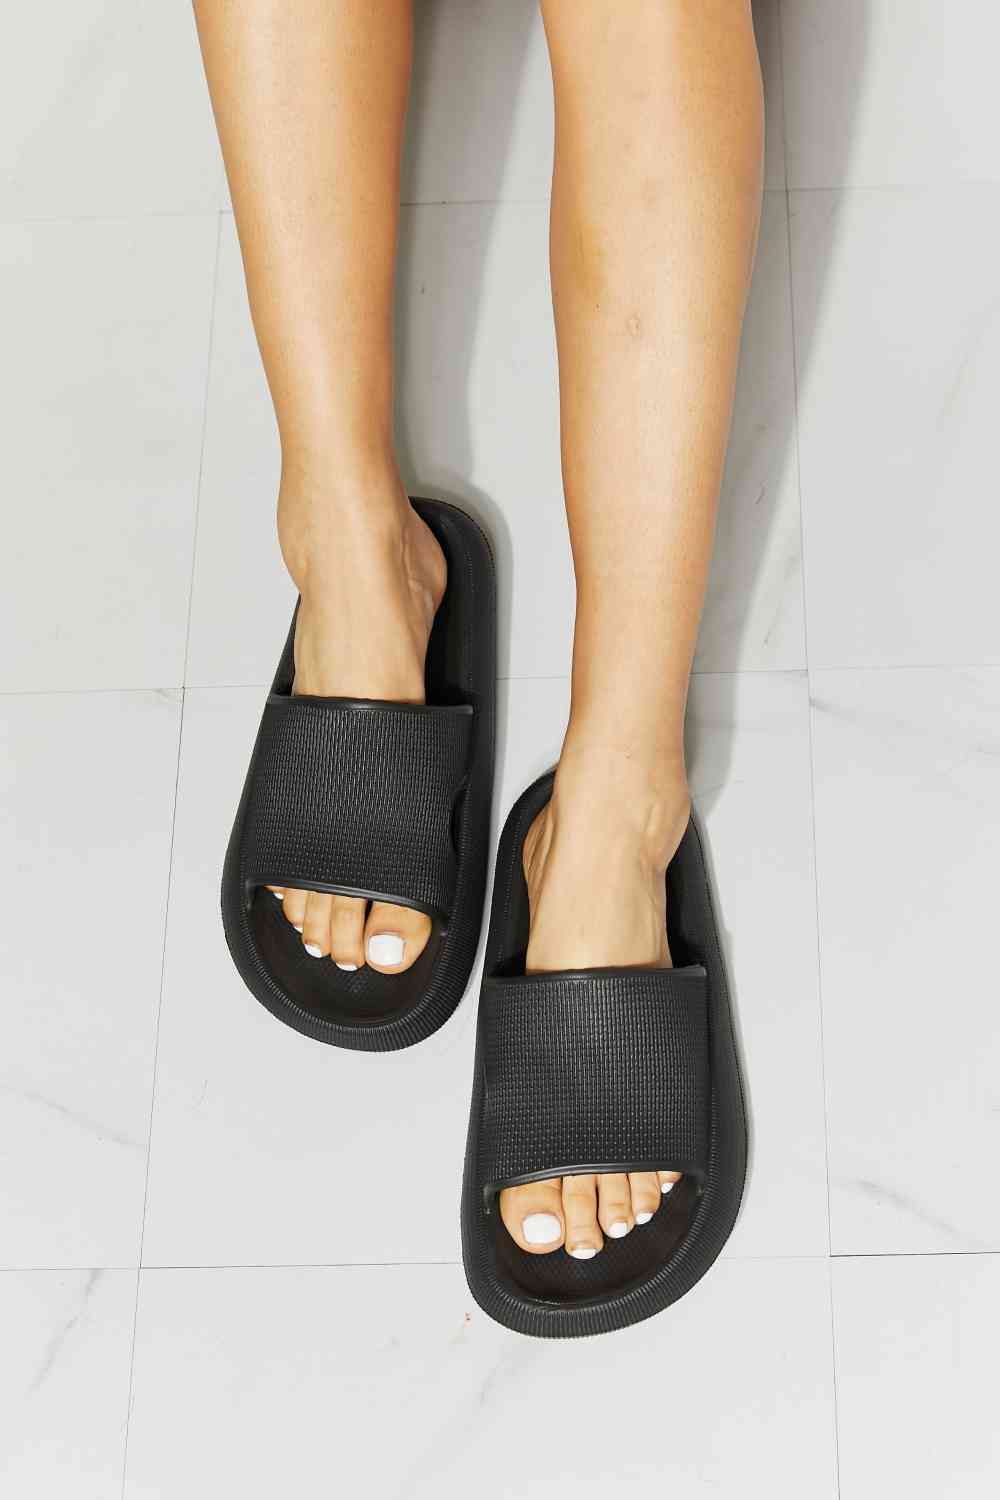 Arms Around Me Open Toe Slide in Black - Black / 6 - Accessories - Shoes - 1 - 2024